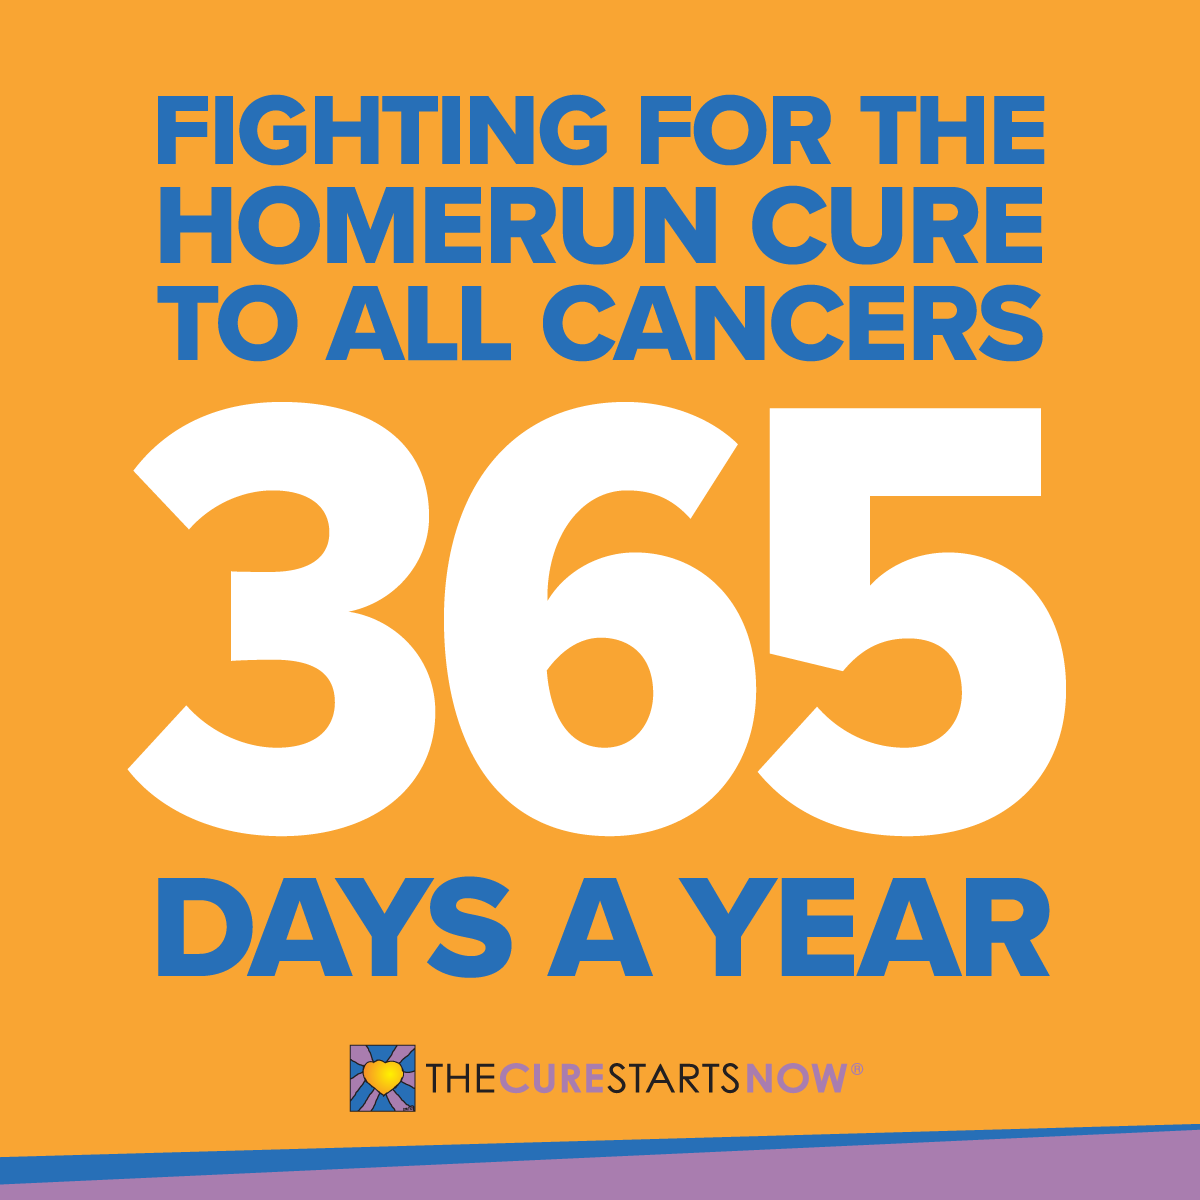 Fighting for the homerun cure to all cancers 365 days a year